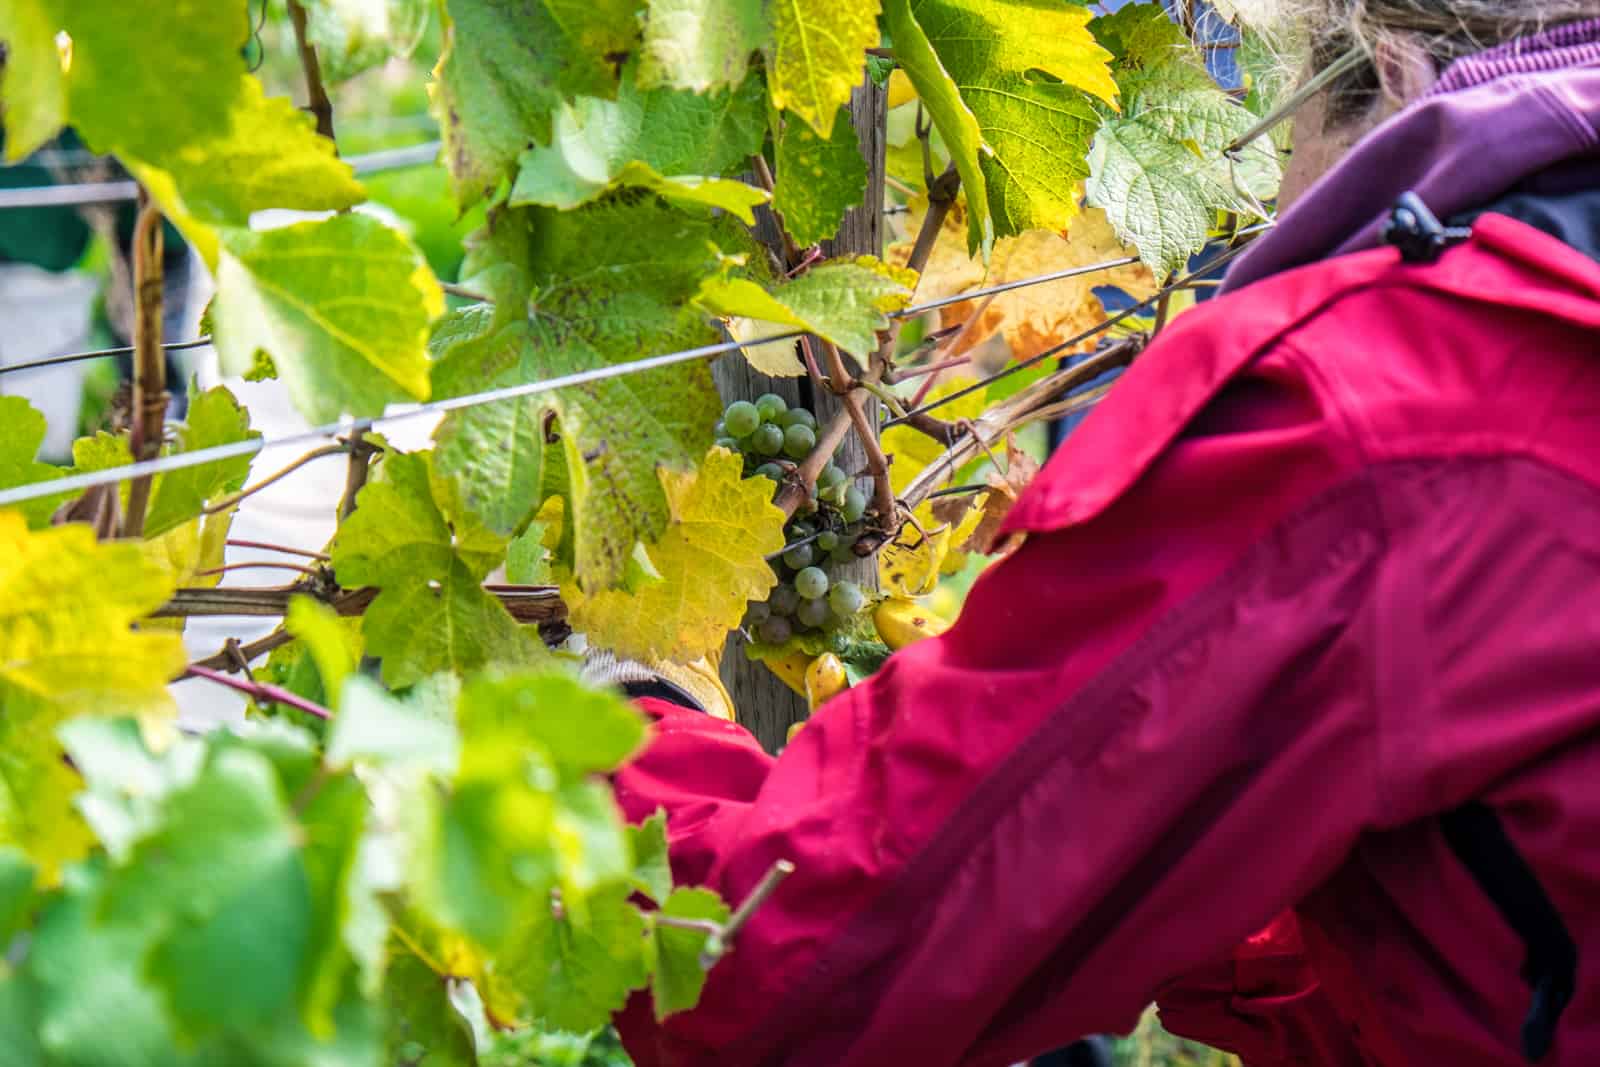 A woman in a pink coat and yellow gloves picks a bunch of grapes from within the green leaves of a vine in Austria